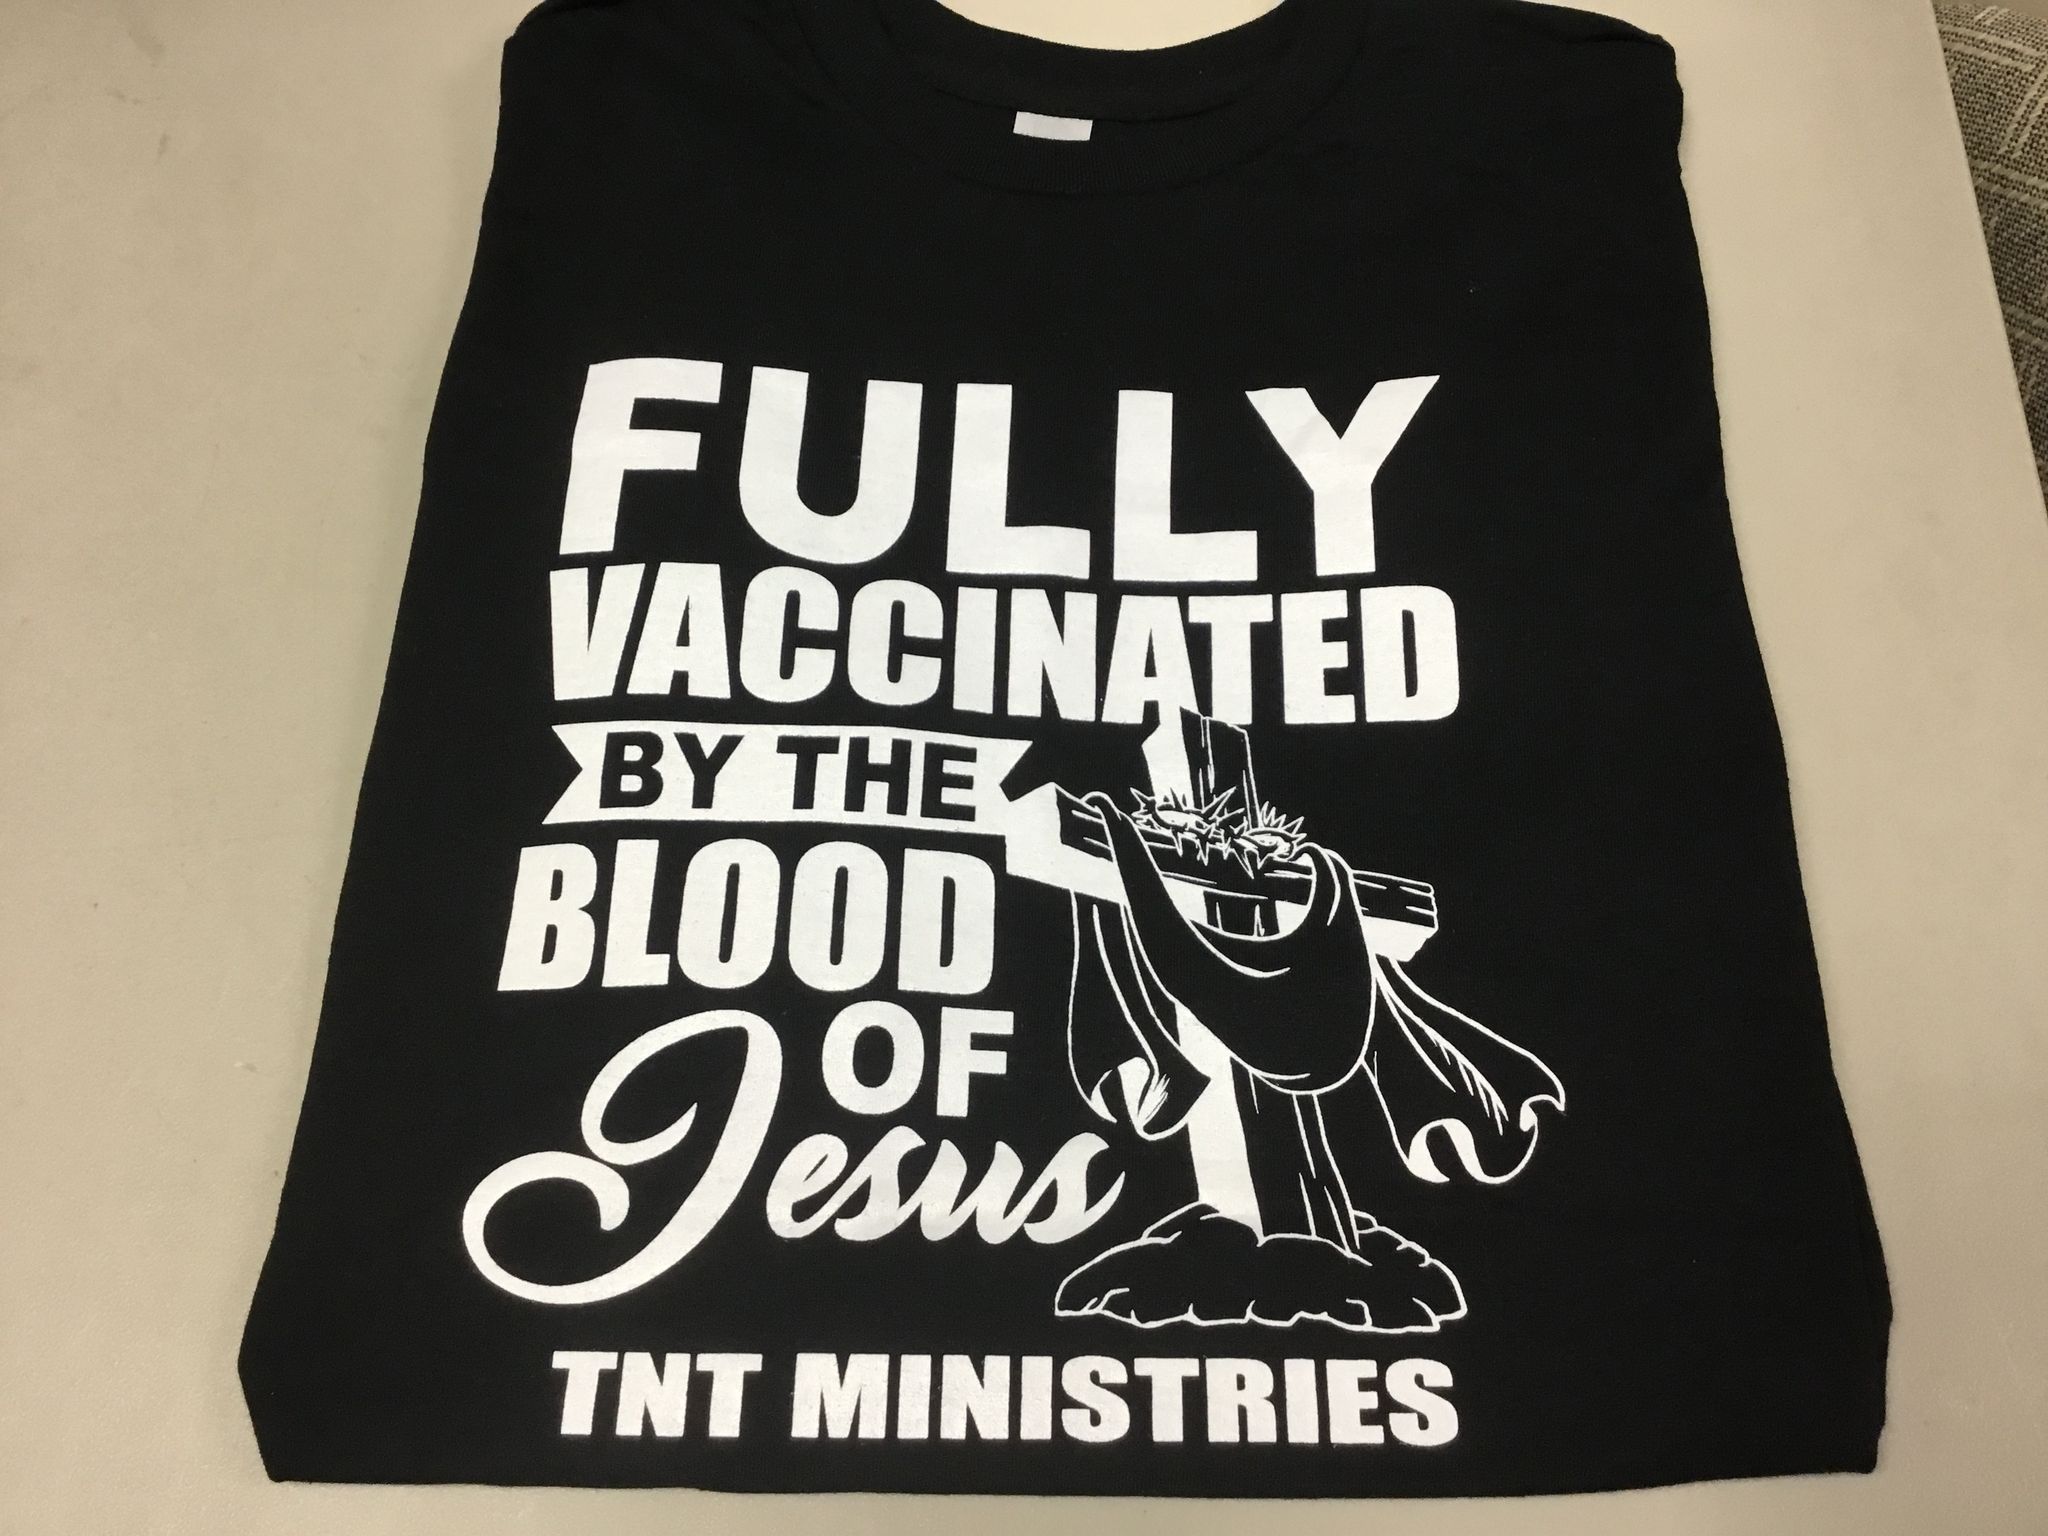 "Fully Vaccinated by the Blood of Jesus" T-Shirt